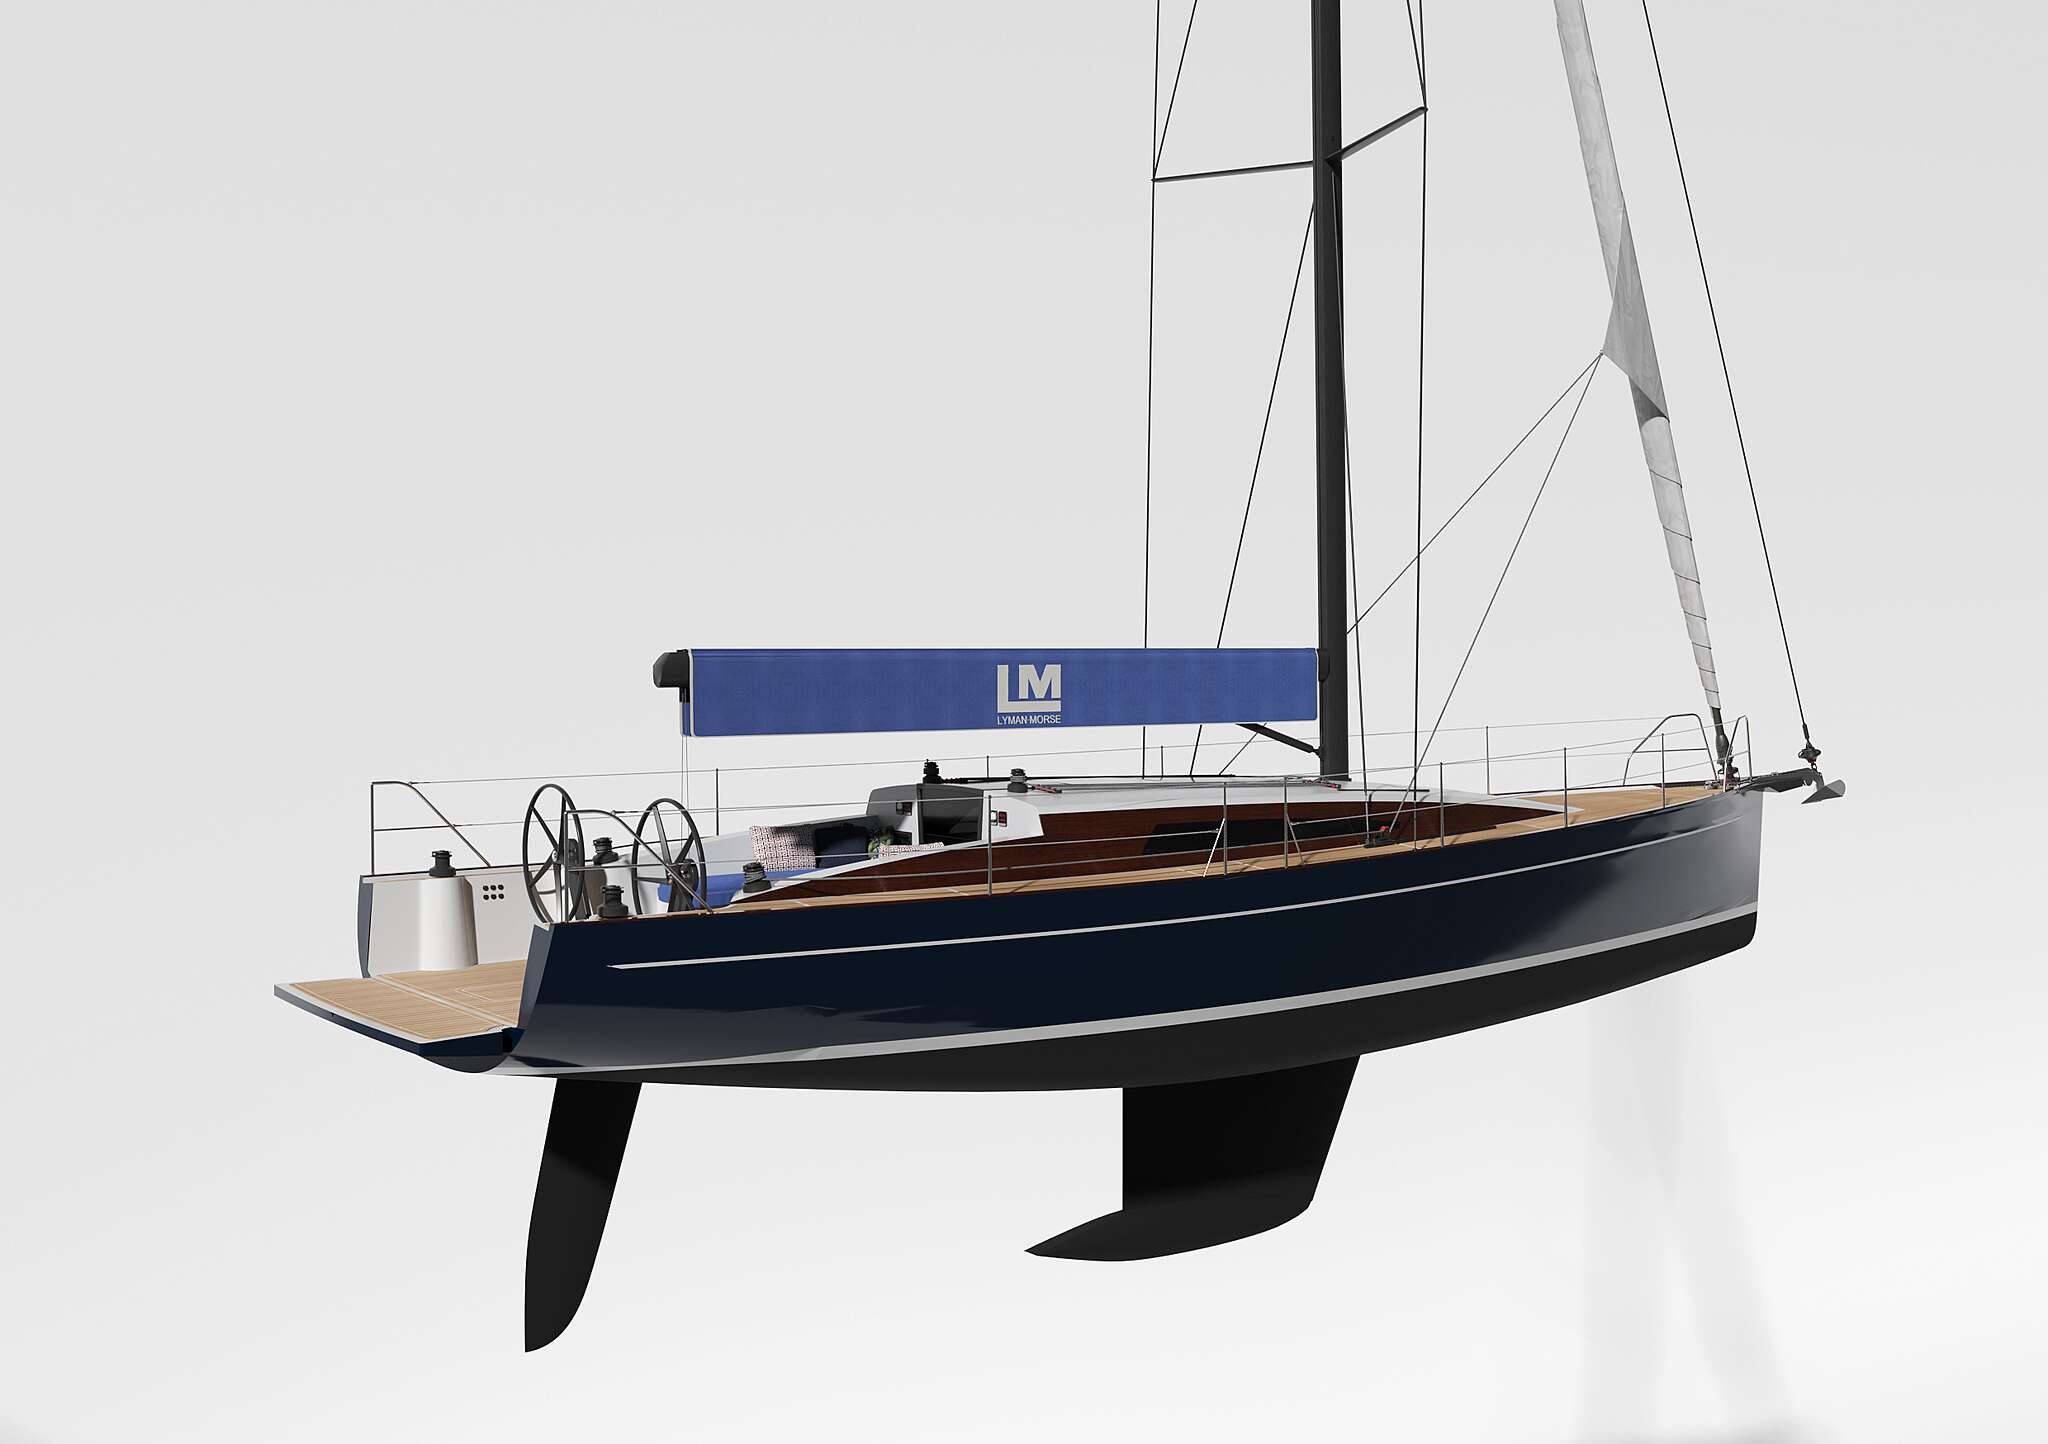 Undeterred by pandemic, Lyman-Morse 'full steam ahead' on new sailboat  build